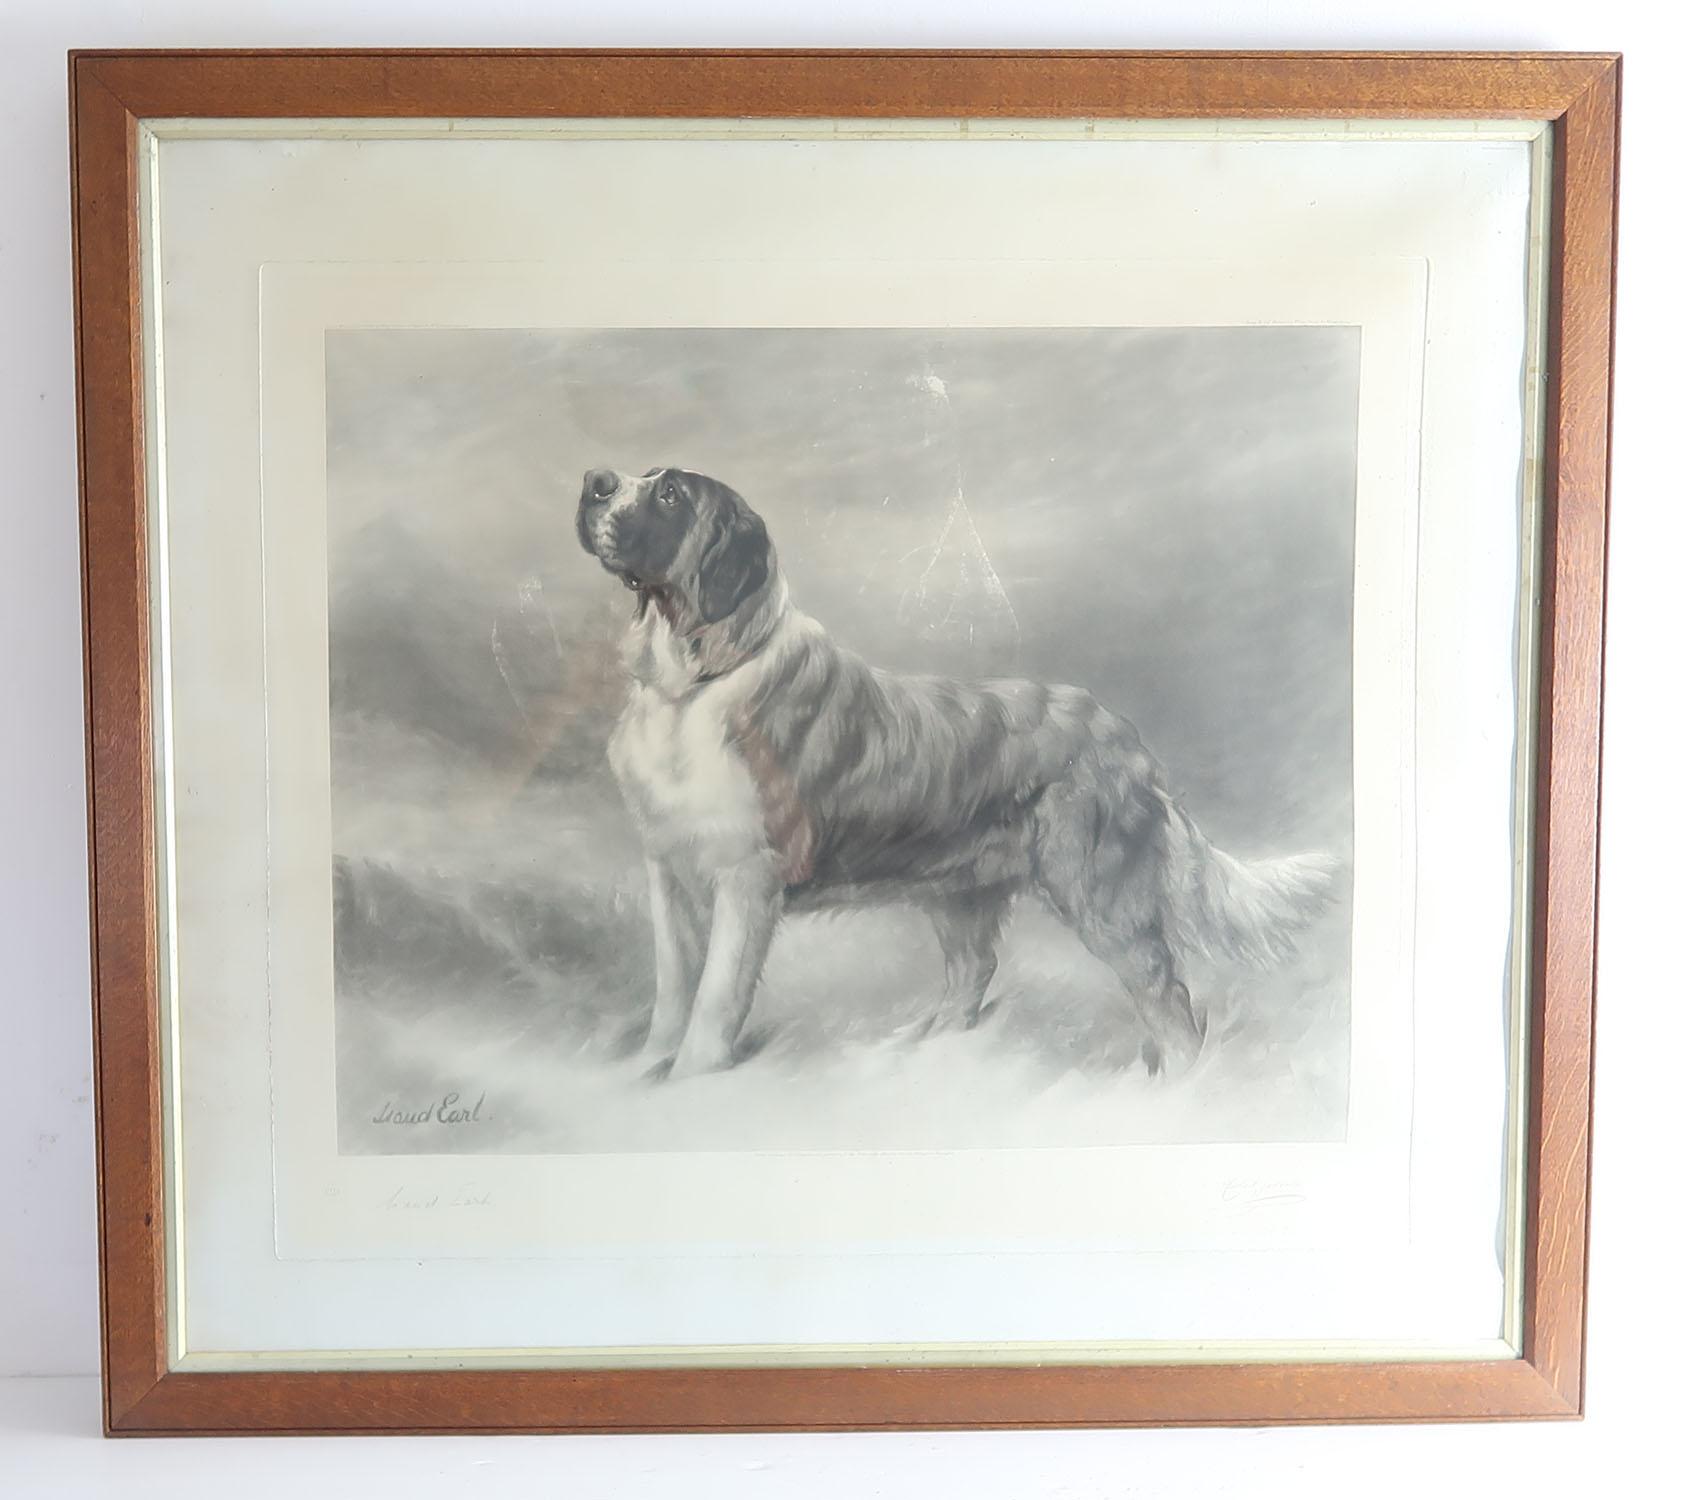 Great image of a St Bernard in a snowy landscape.

Great picture for a ski lodge.

Mixed method engraving by Herbert Sedcote

Published, 1898.

Pencil signatures of both the artist and the engraver.

Original golden oak frame

Some